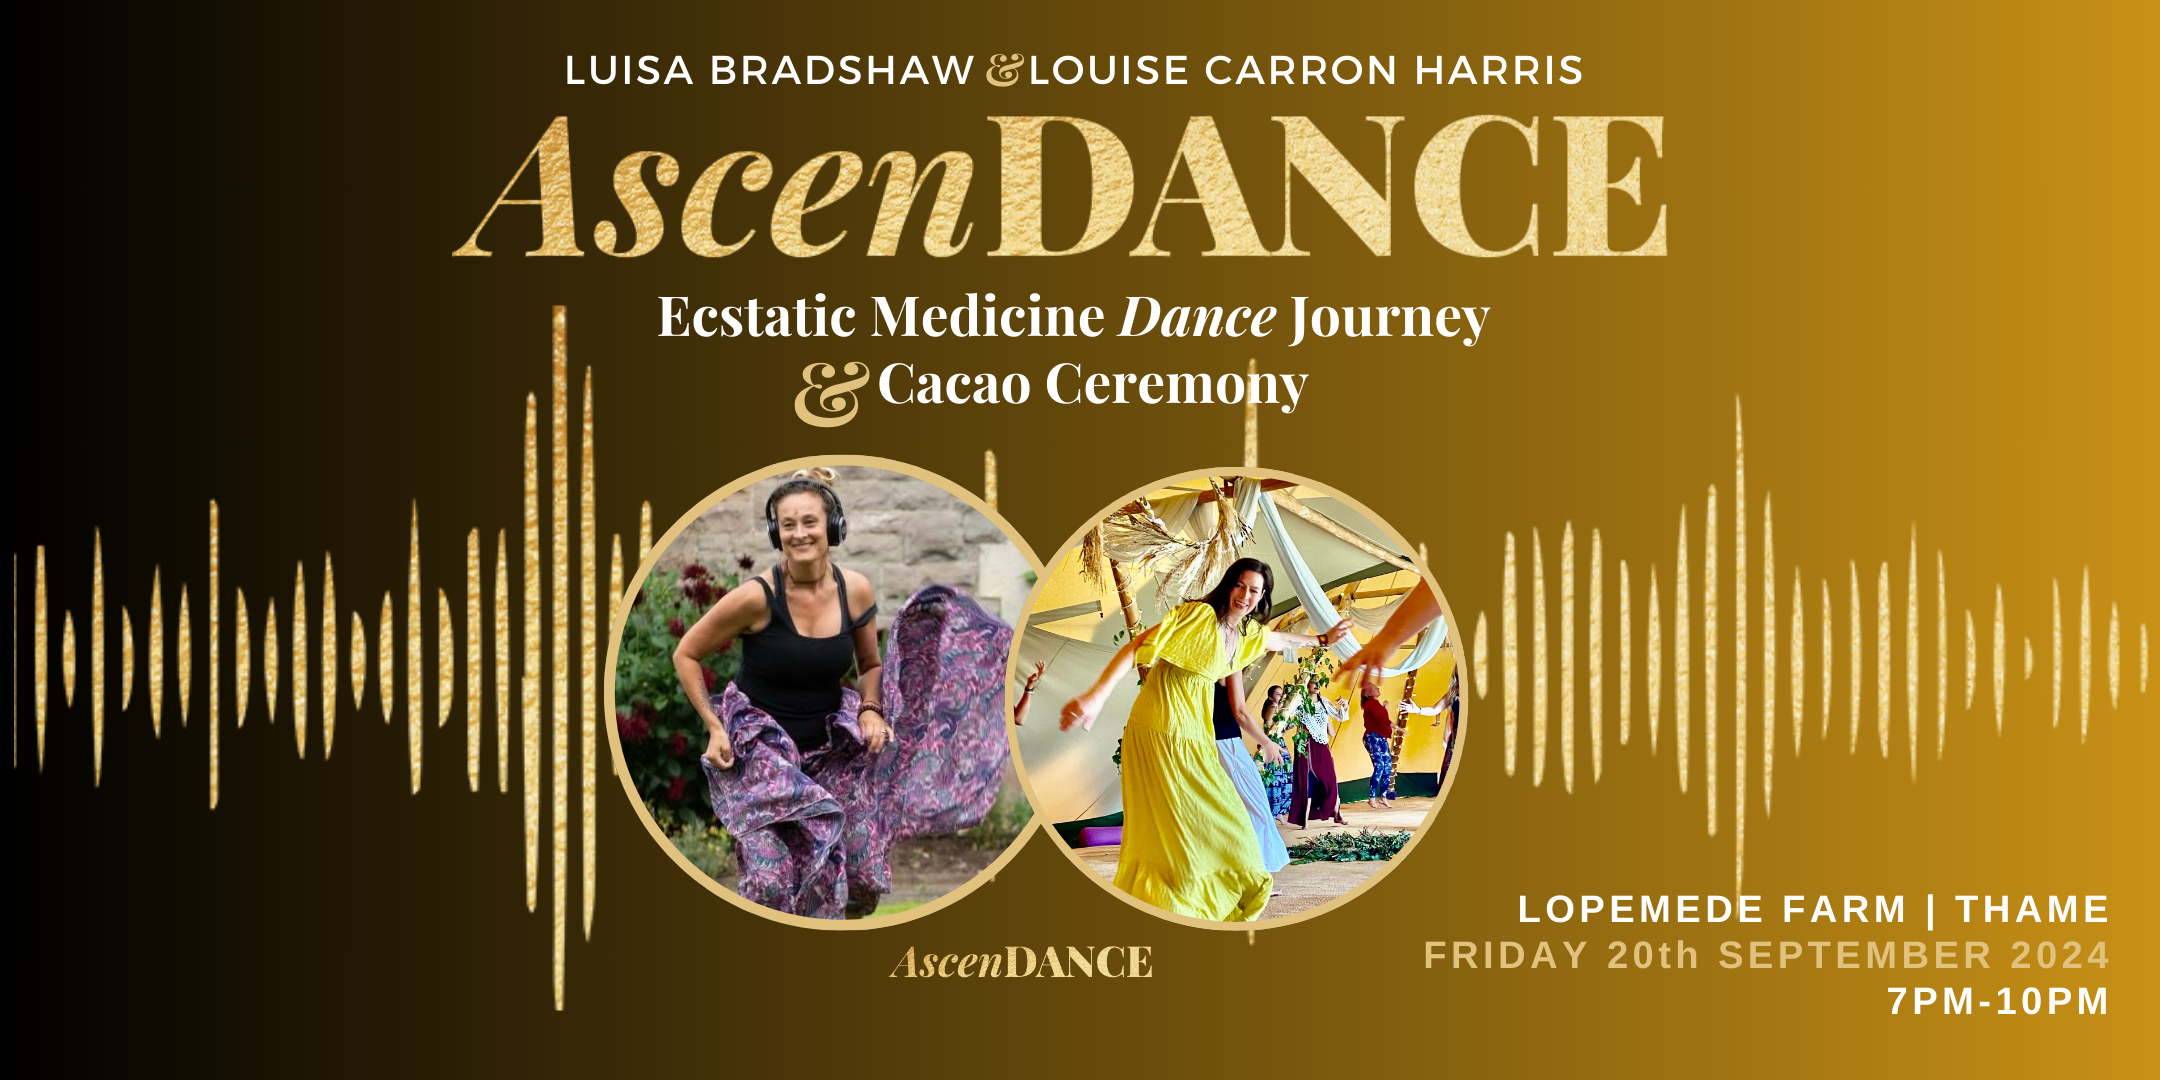 with Luisa & Louise Carron Harris Friday 20th Sept, 7-10pm Lopemede Farm, Thame Another unforgettable Ecstatic Medicine Dance journey, Sacred Cacao & Fire ceremony.